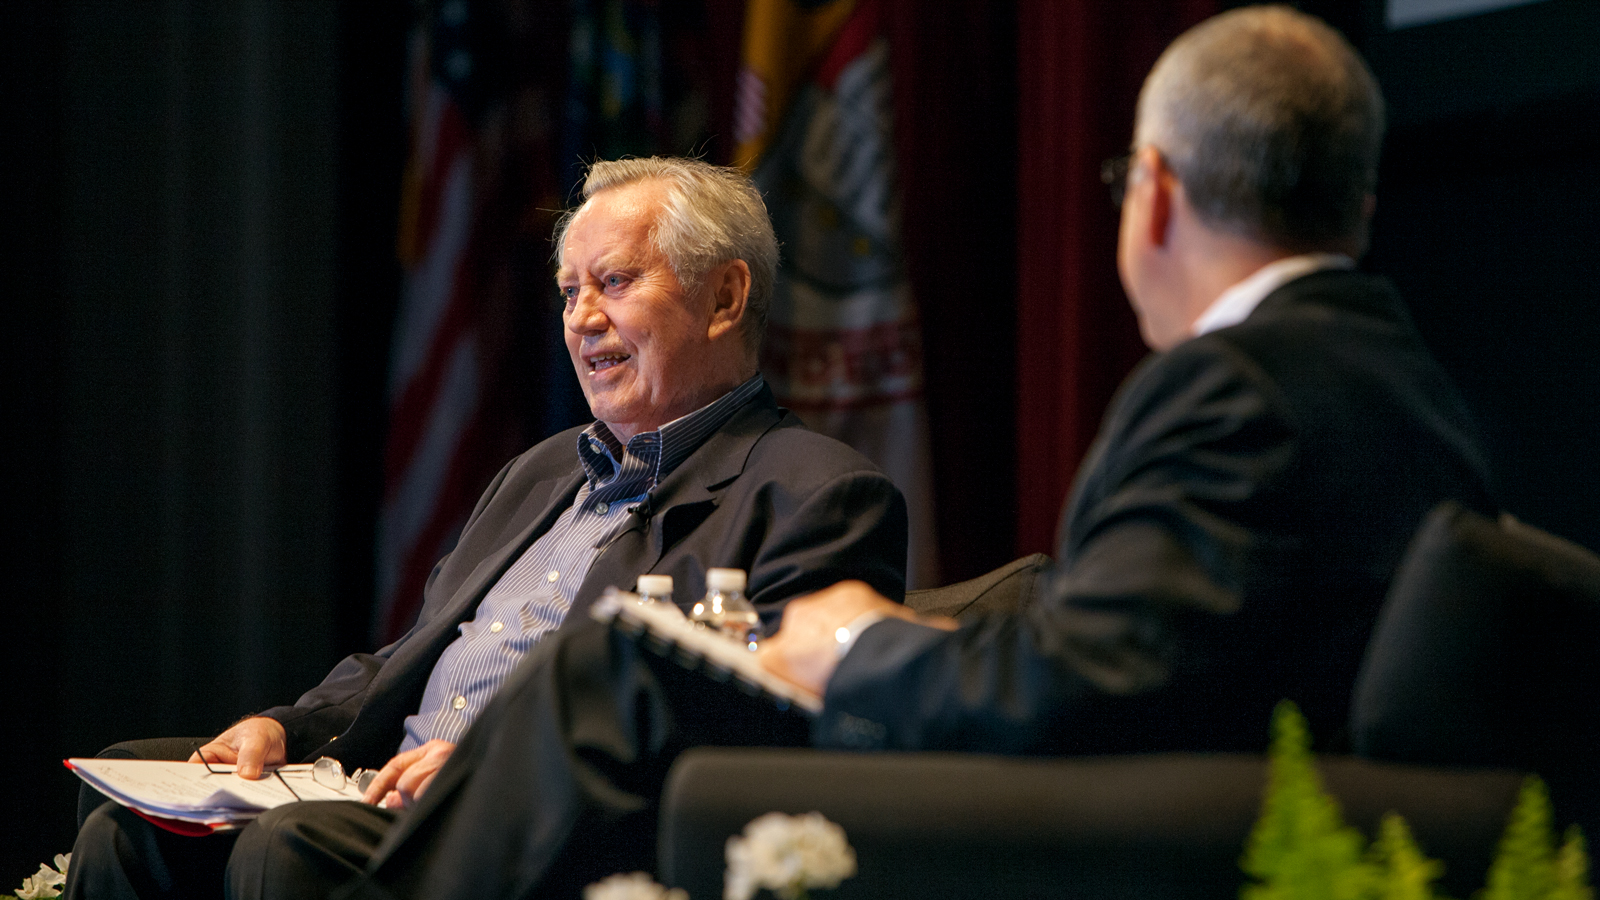 Chuck Feeney chats with then-President David Skorton at the Olin Lecture in 2011